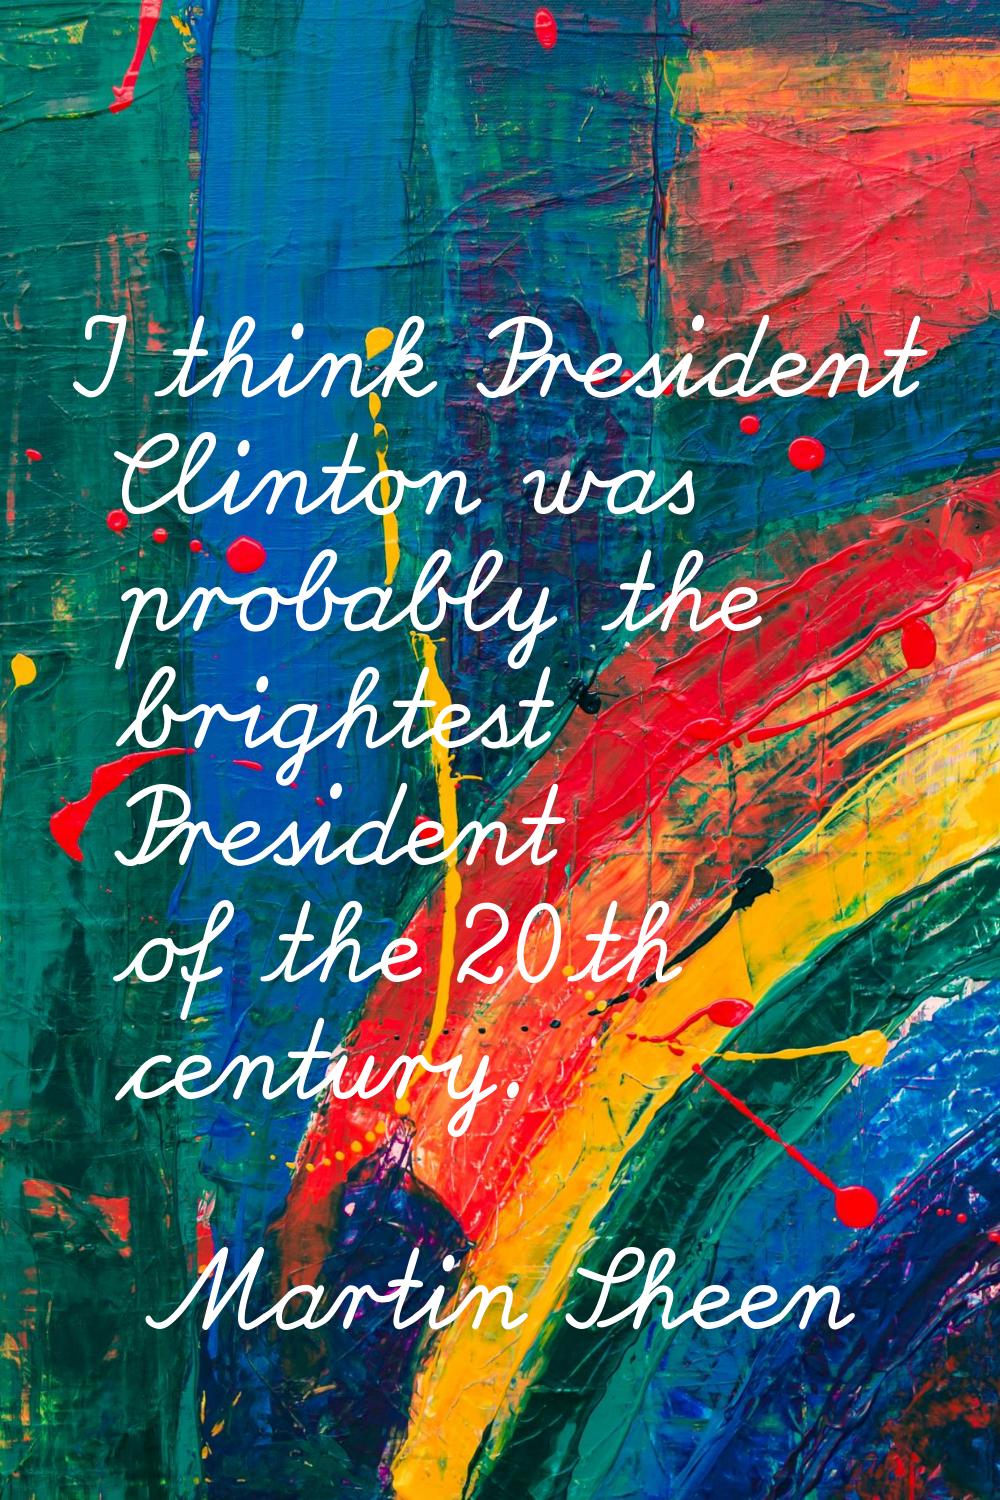 I think President Clinton was probably the brightest President of the 20th century.